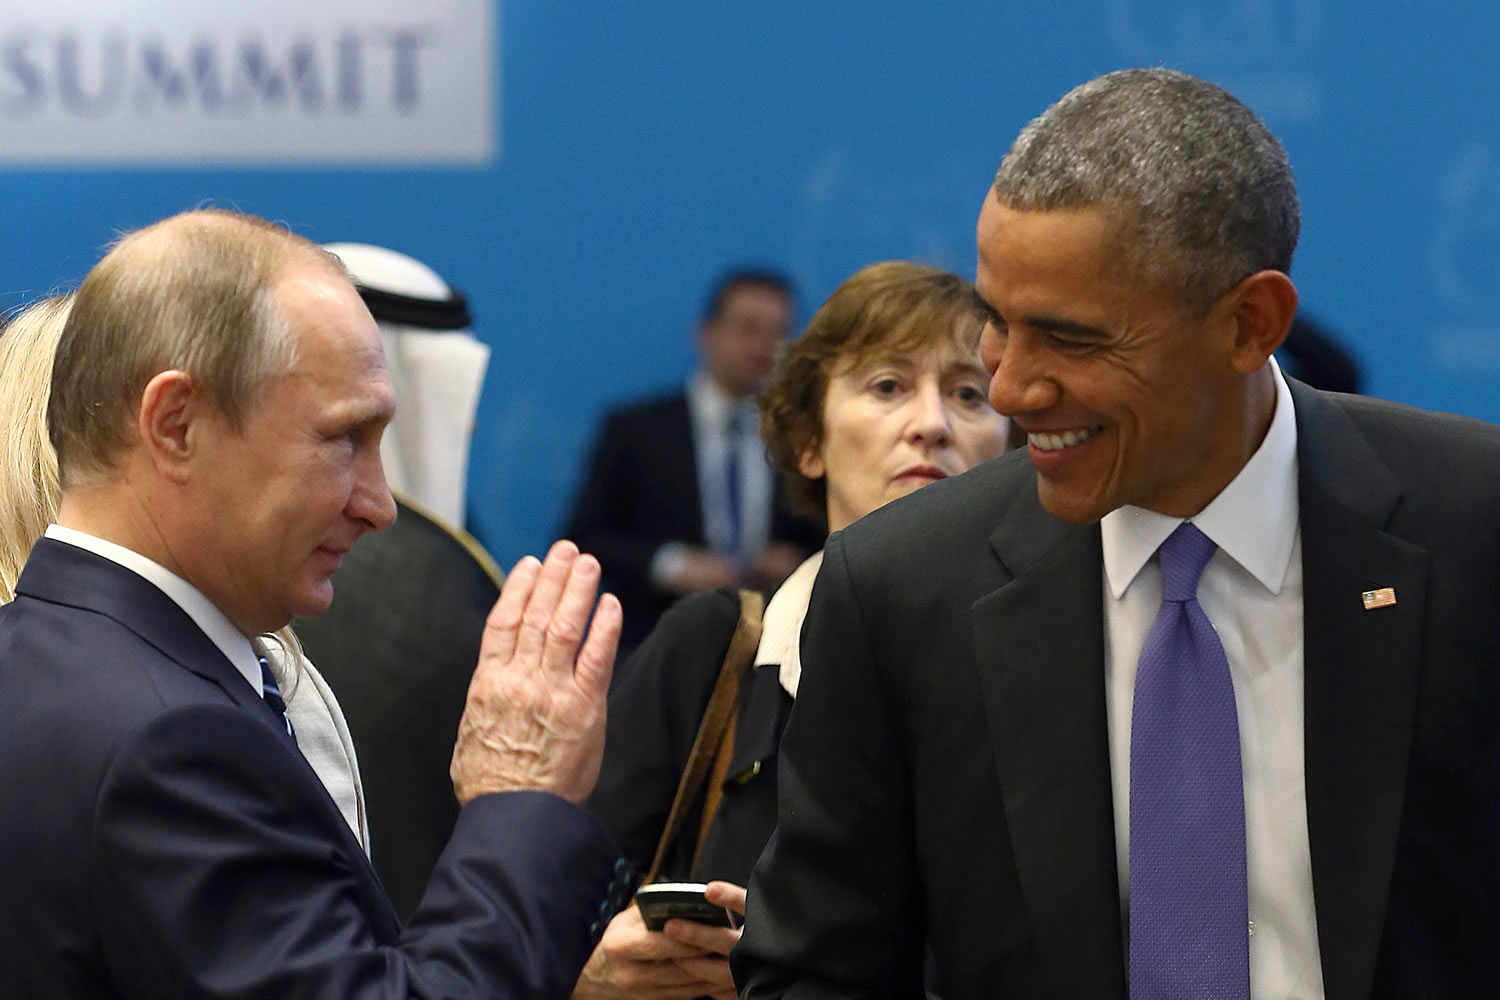 Obama and Putin reach agreement over “transition in Syria” but differ on war